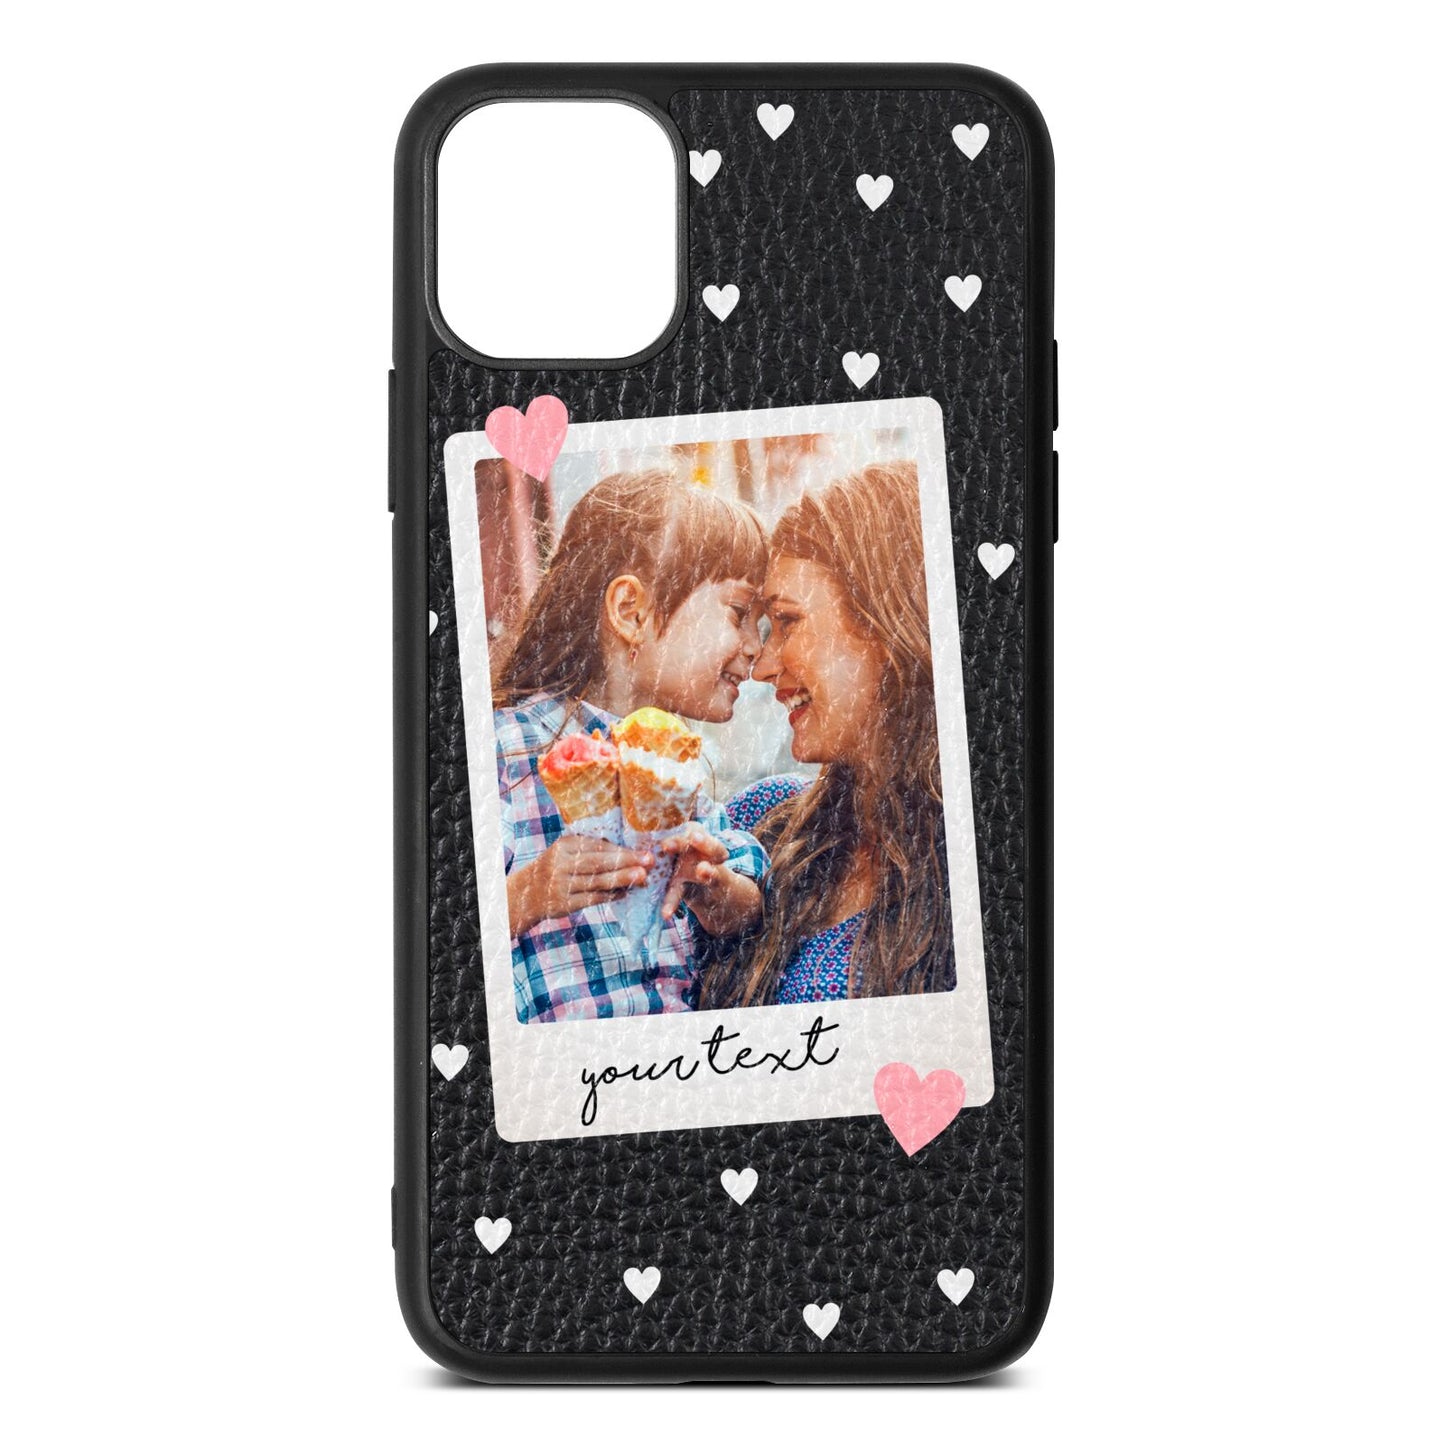 Personalised Photo Love Hearts Black Pebble Leather iPhone 11 Pro Max Case